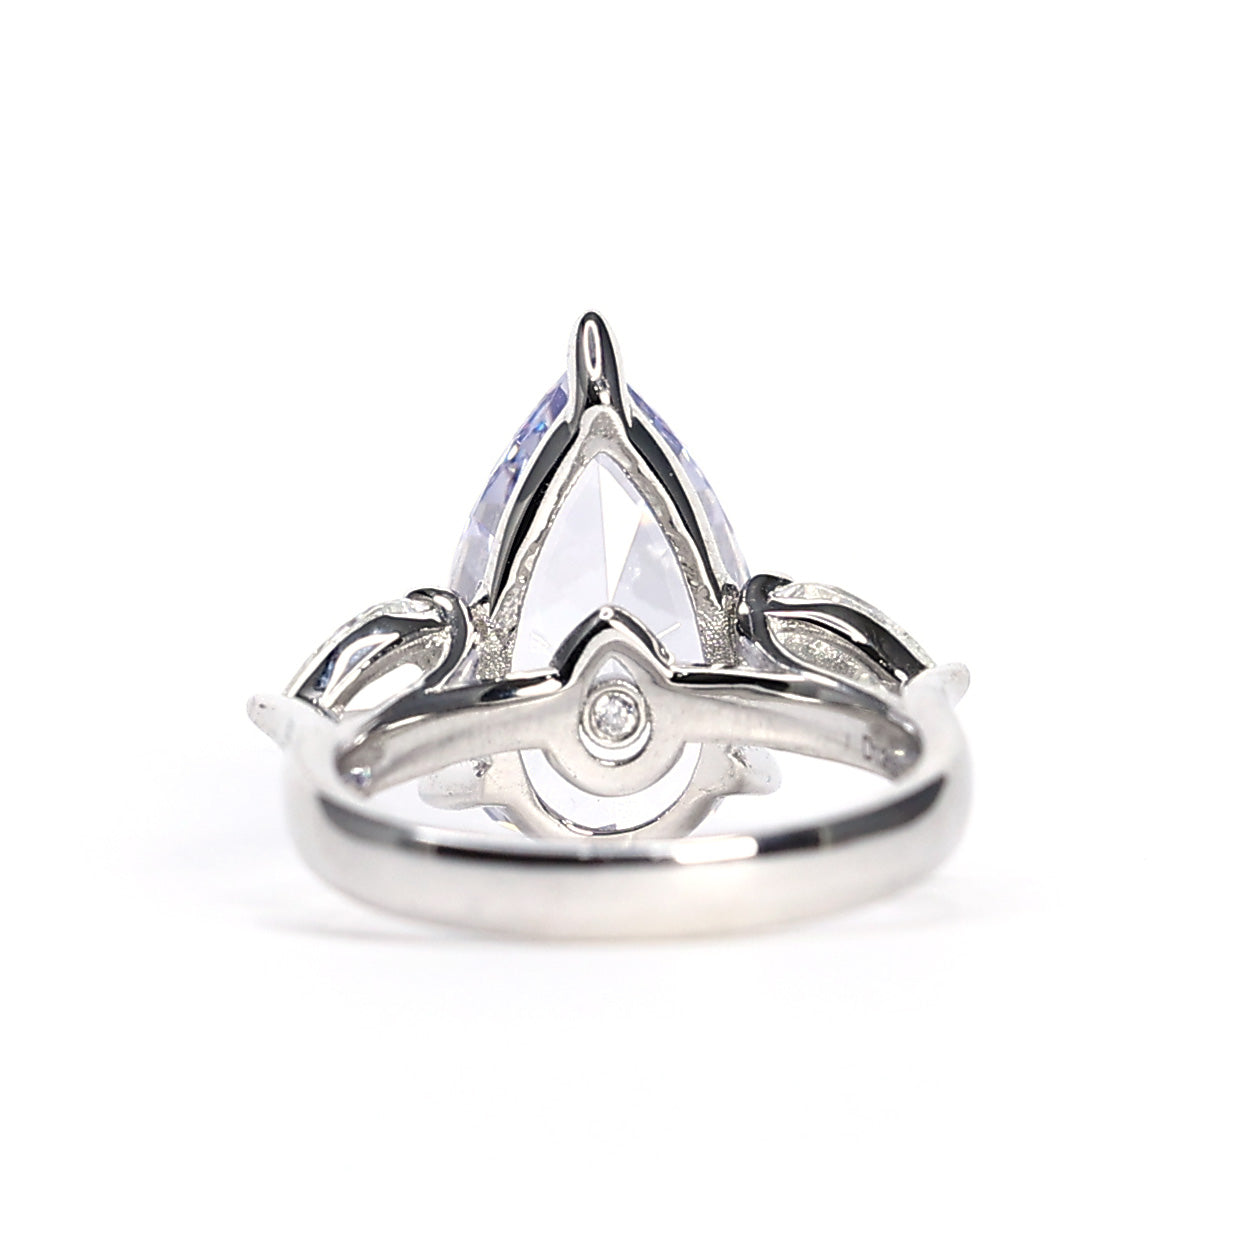 Micro-setting Lavender color waterdrop ring, sterling silver. (12.9 carat)